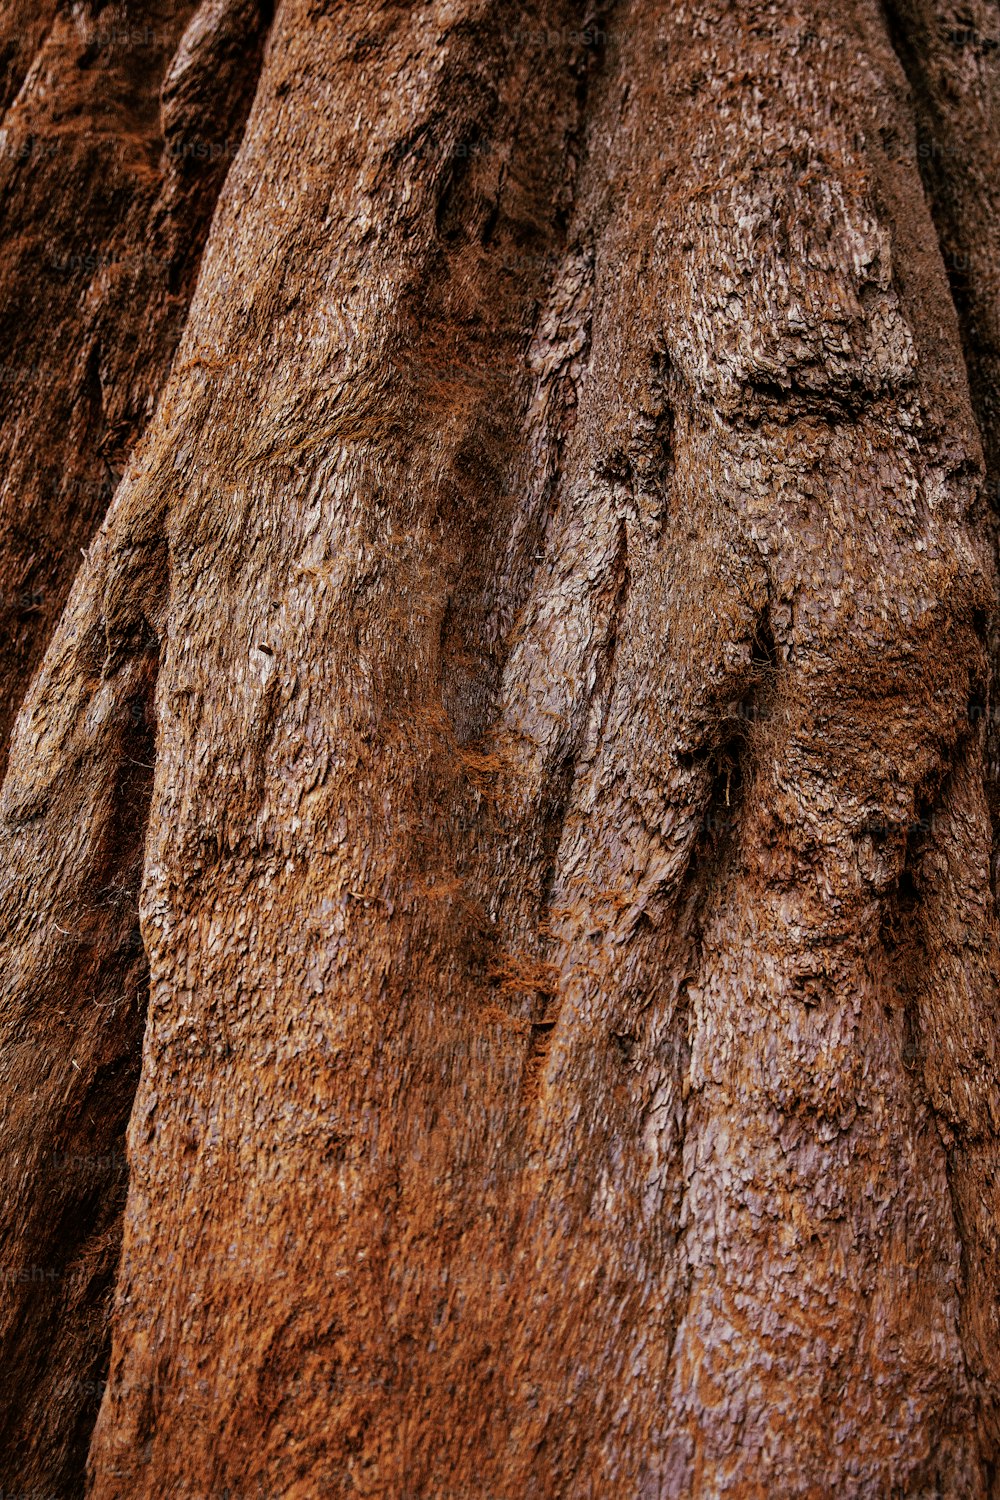 a close up of a tree trunk with a bird perched on top of it